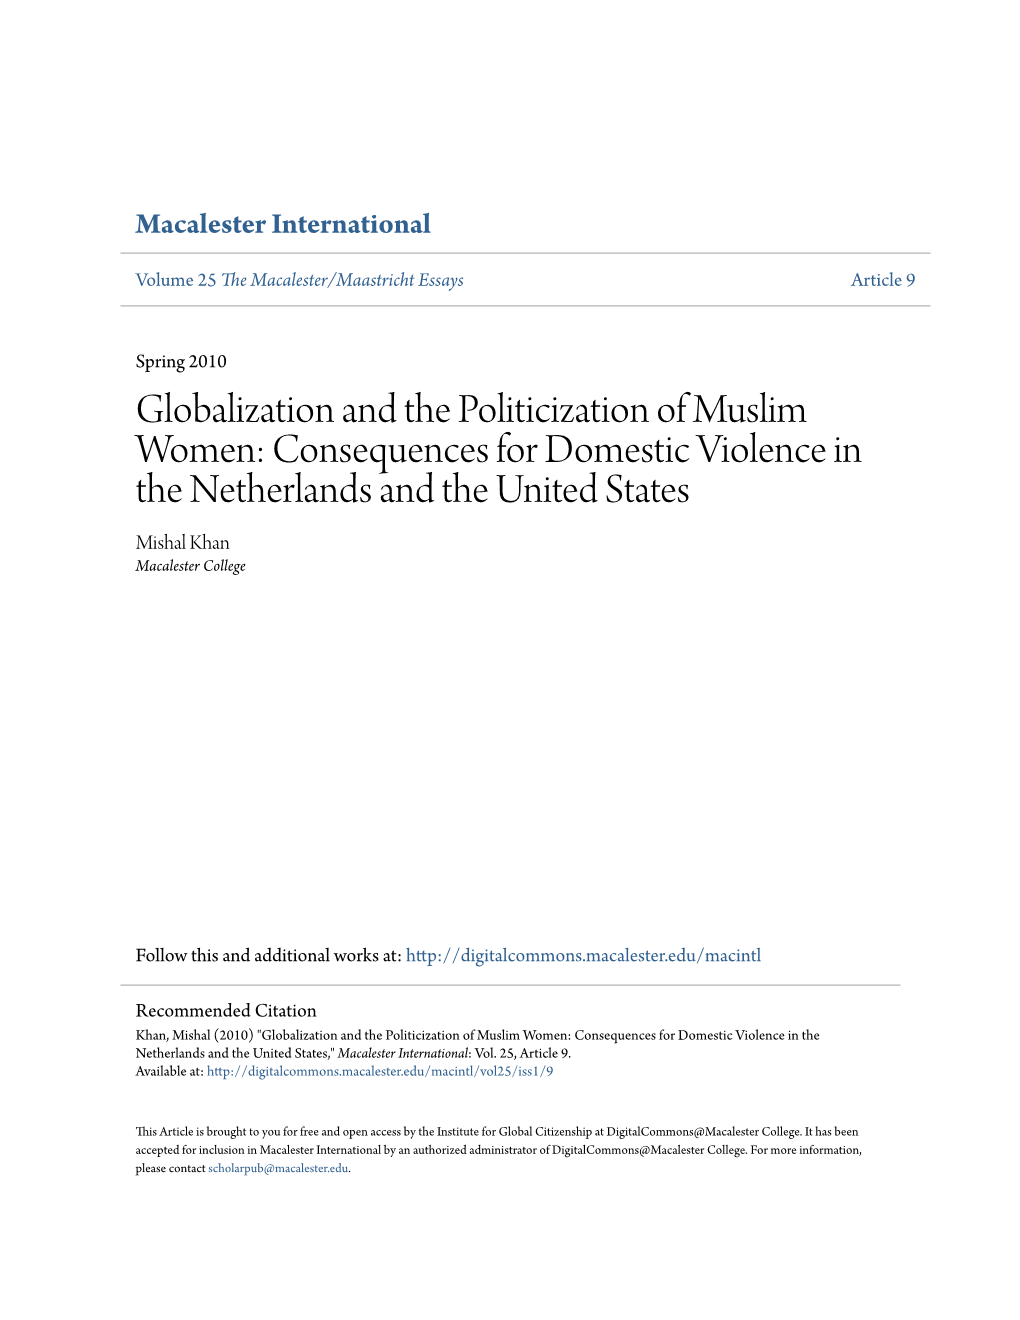 Globalization and the Politicization of Muslim Women: Consequences for Domestic Violence in the Netherlands and the United States Mishal Khan Macalester College